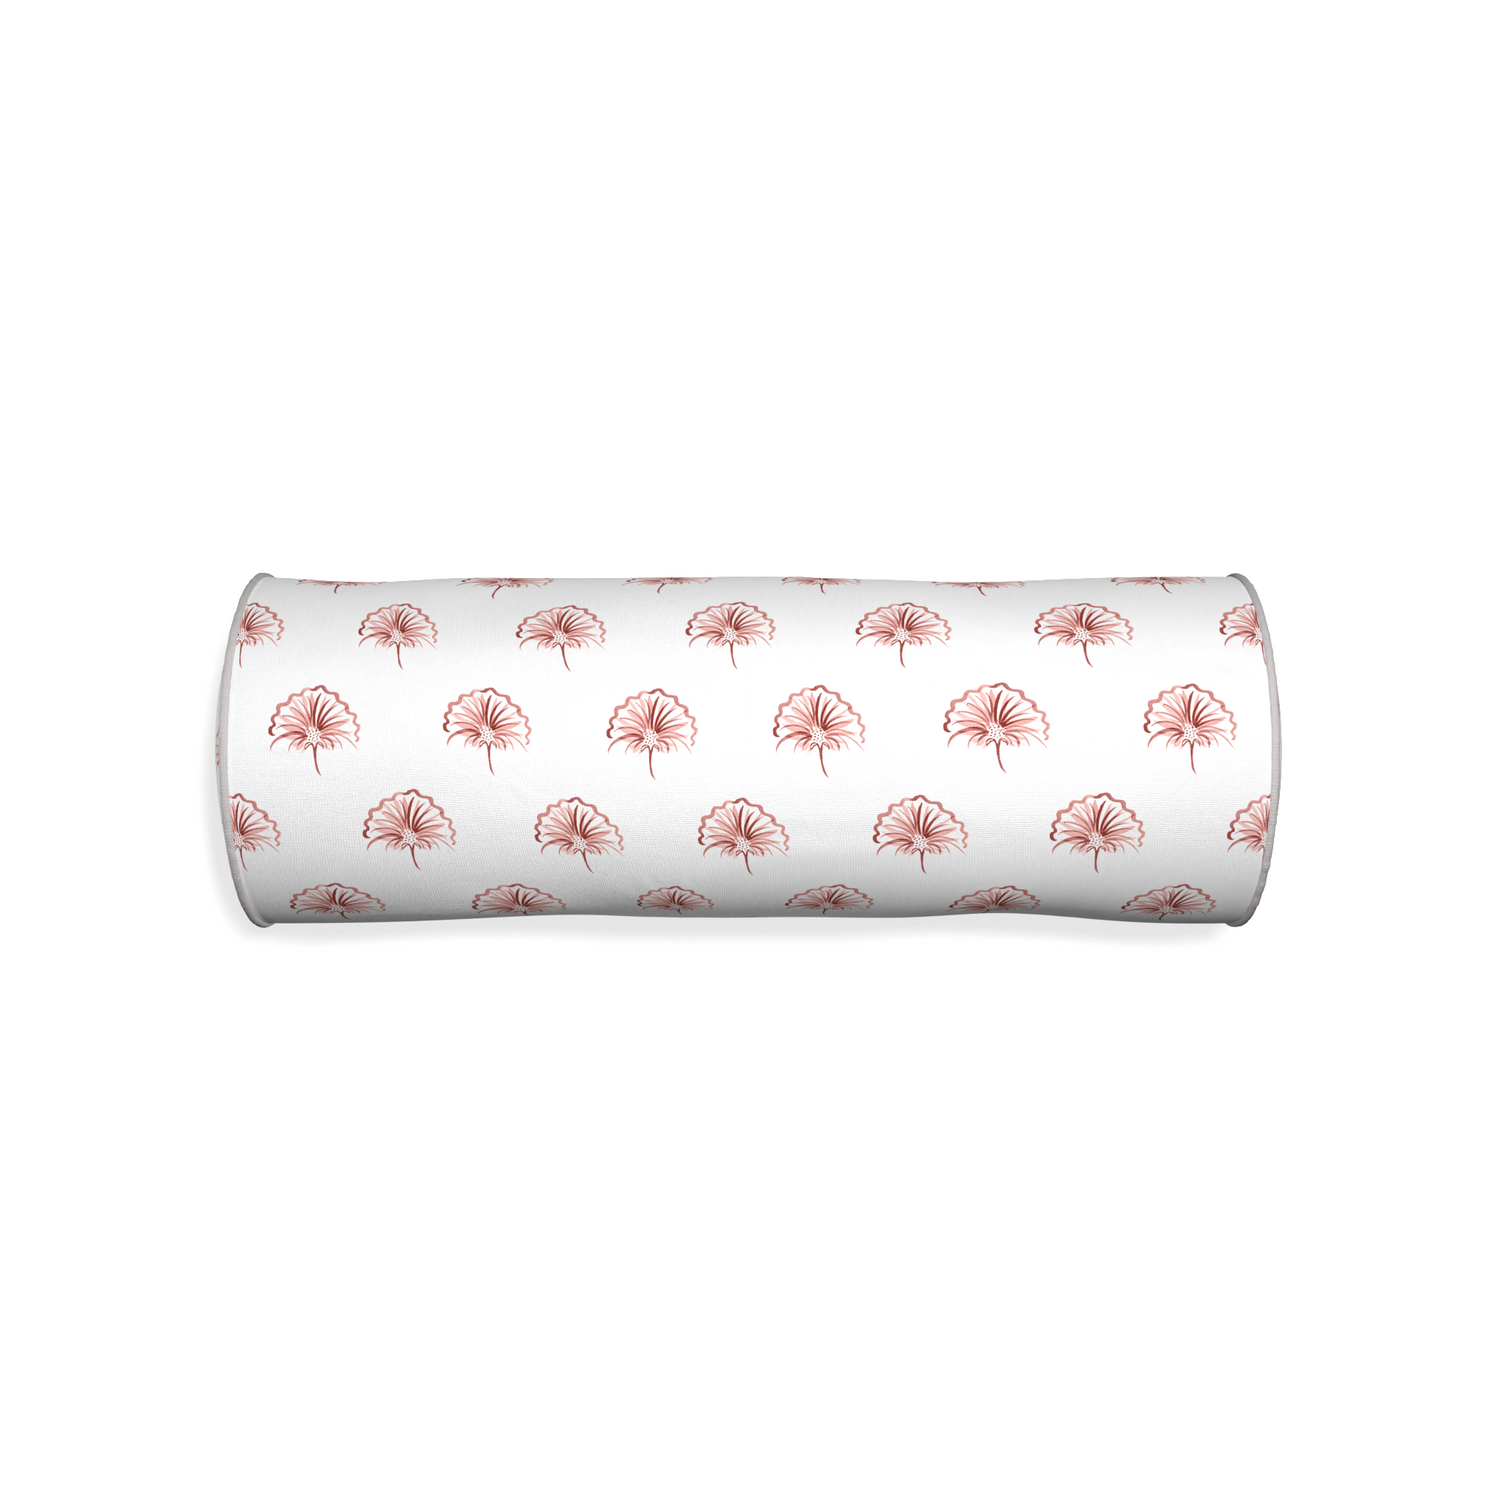 Bolster penelope rose custom floral pinkpillow with pebble piping on white background